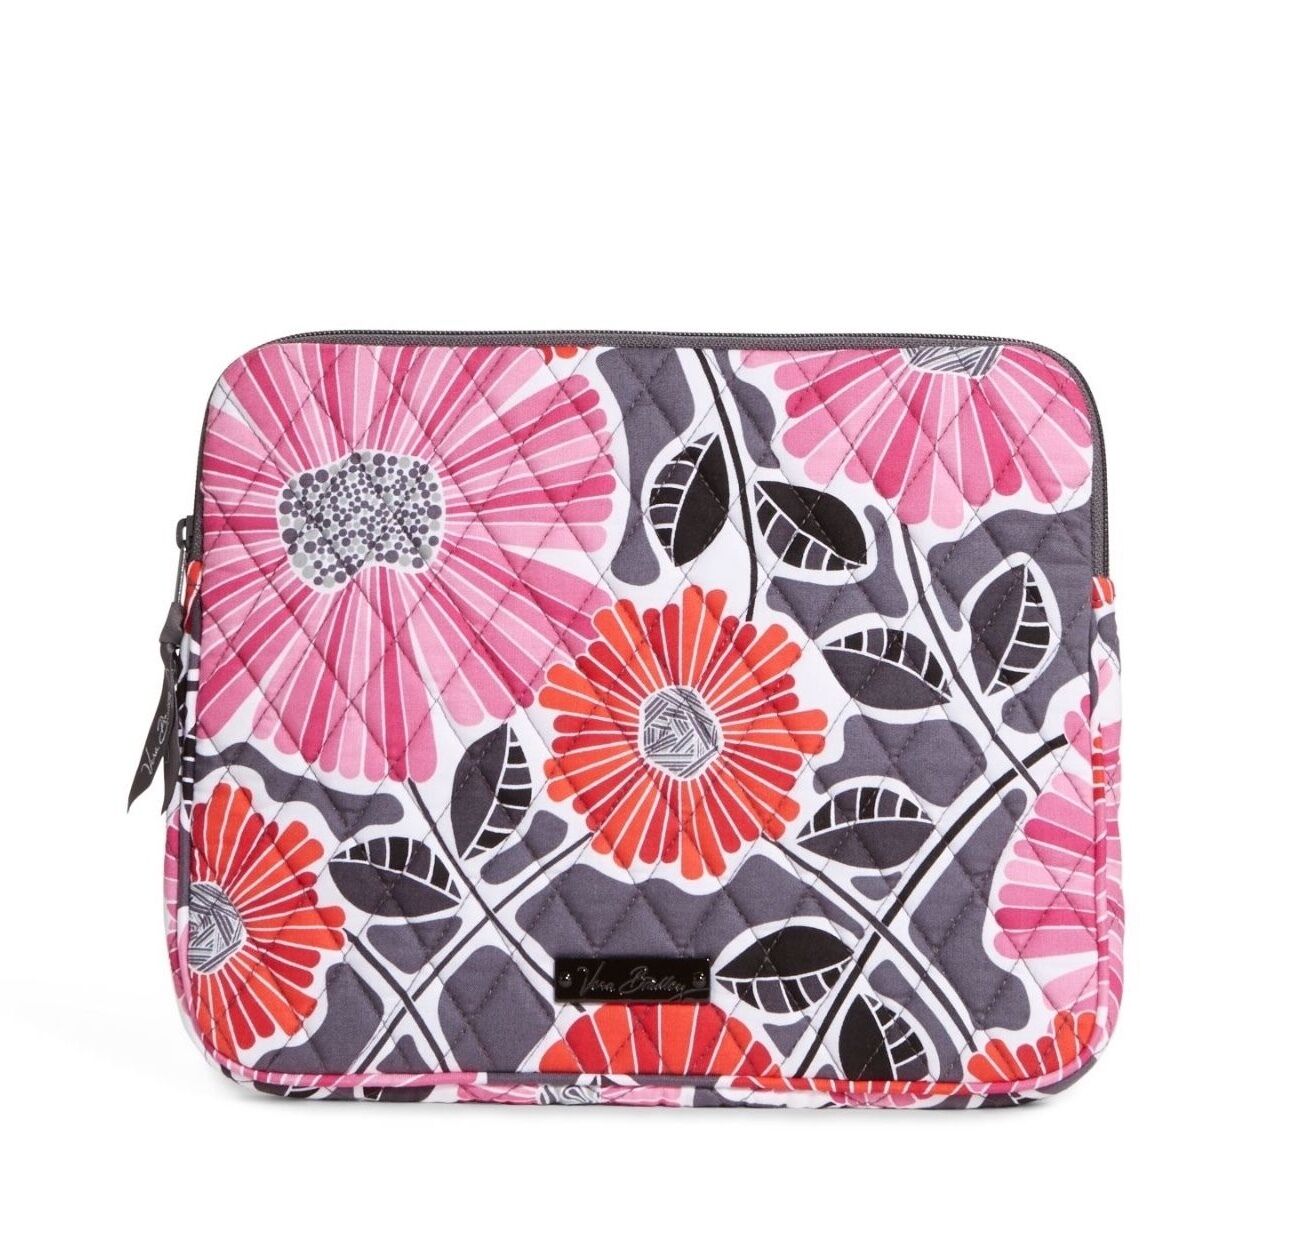 NWT Vera Bradley Tablet Sleeve in Cheery Blossoms 14275 170 CO